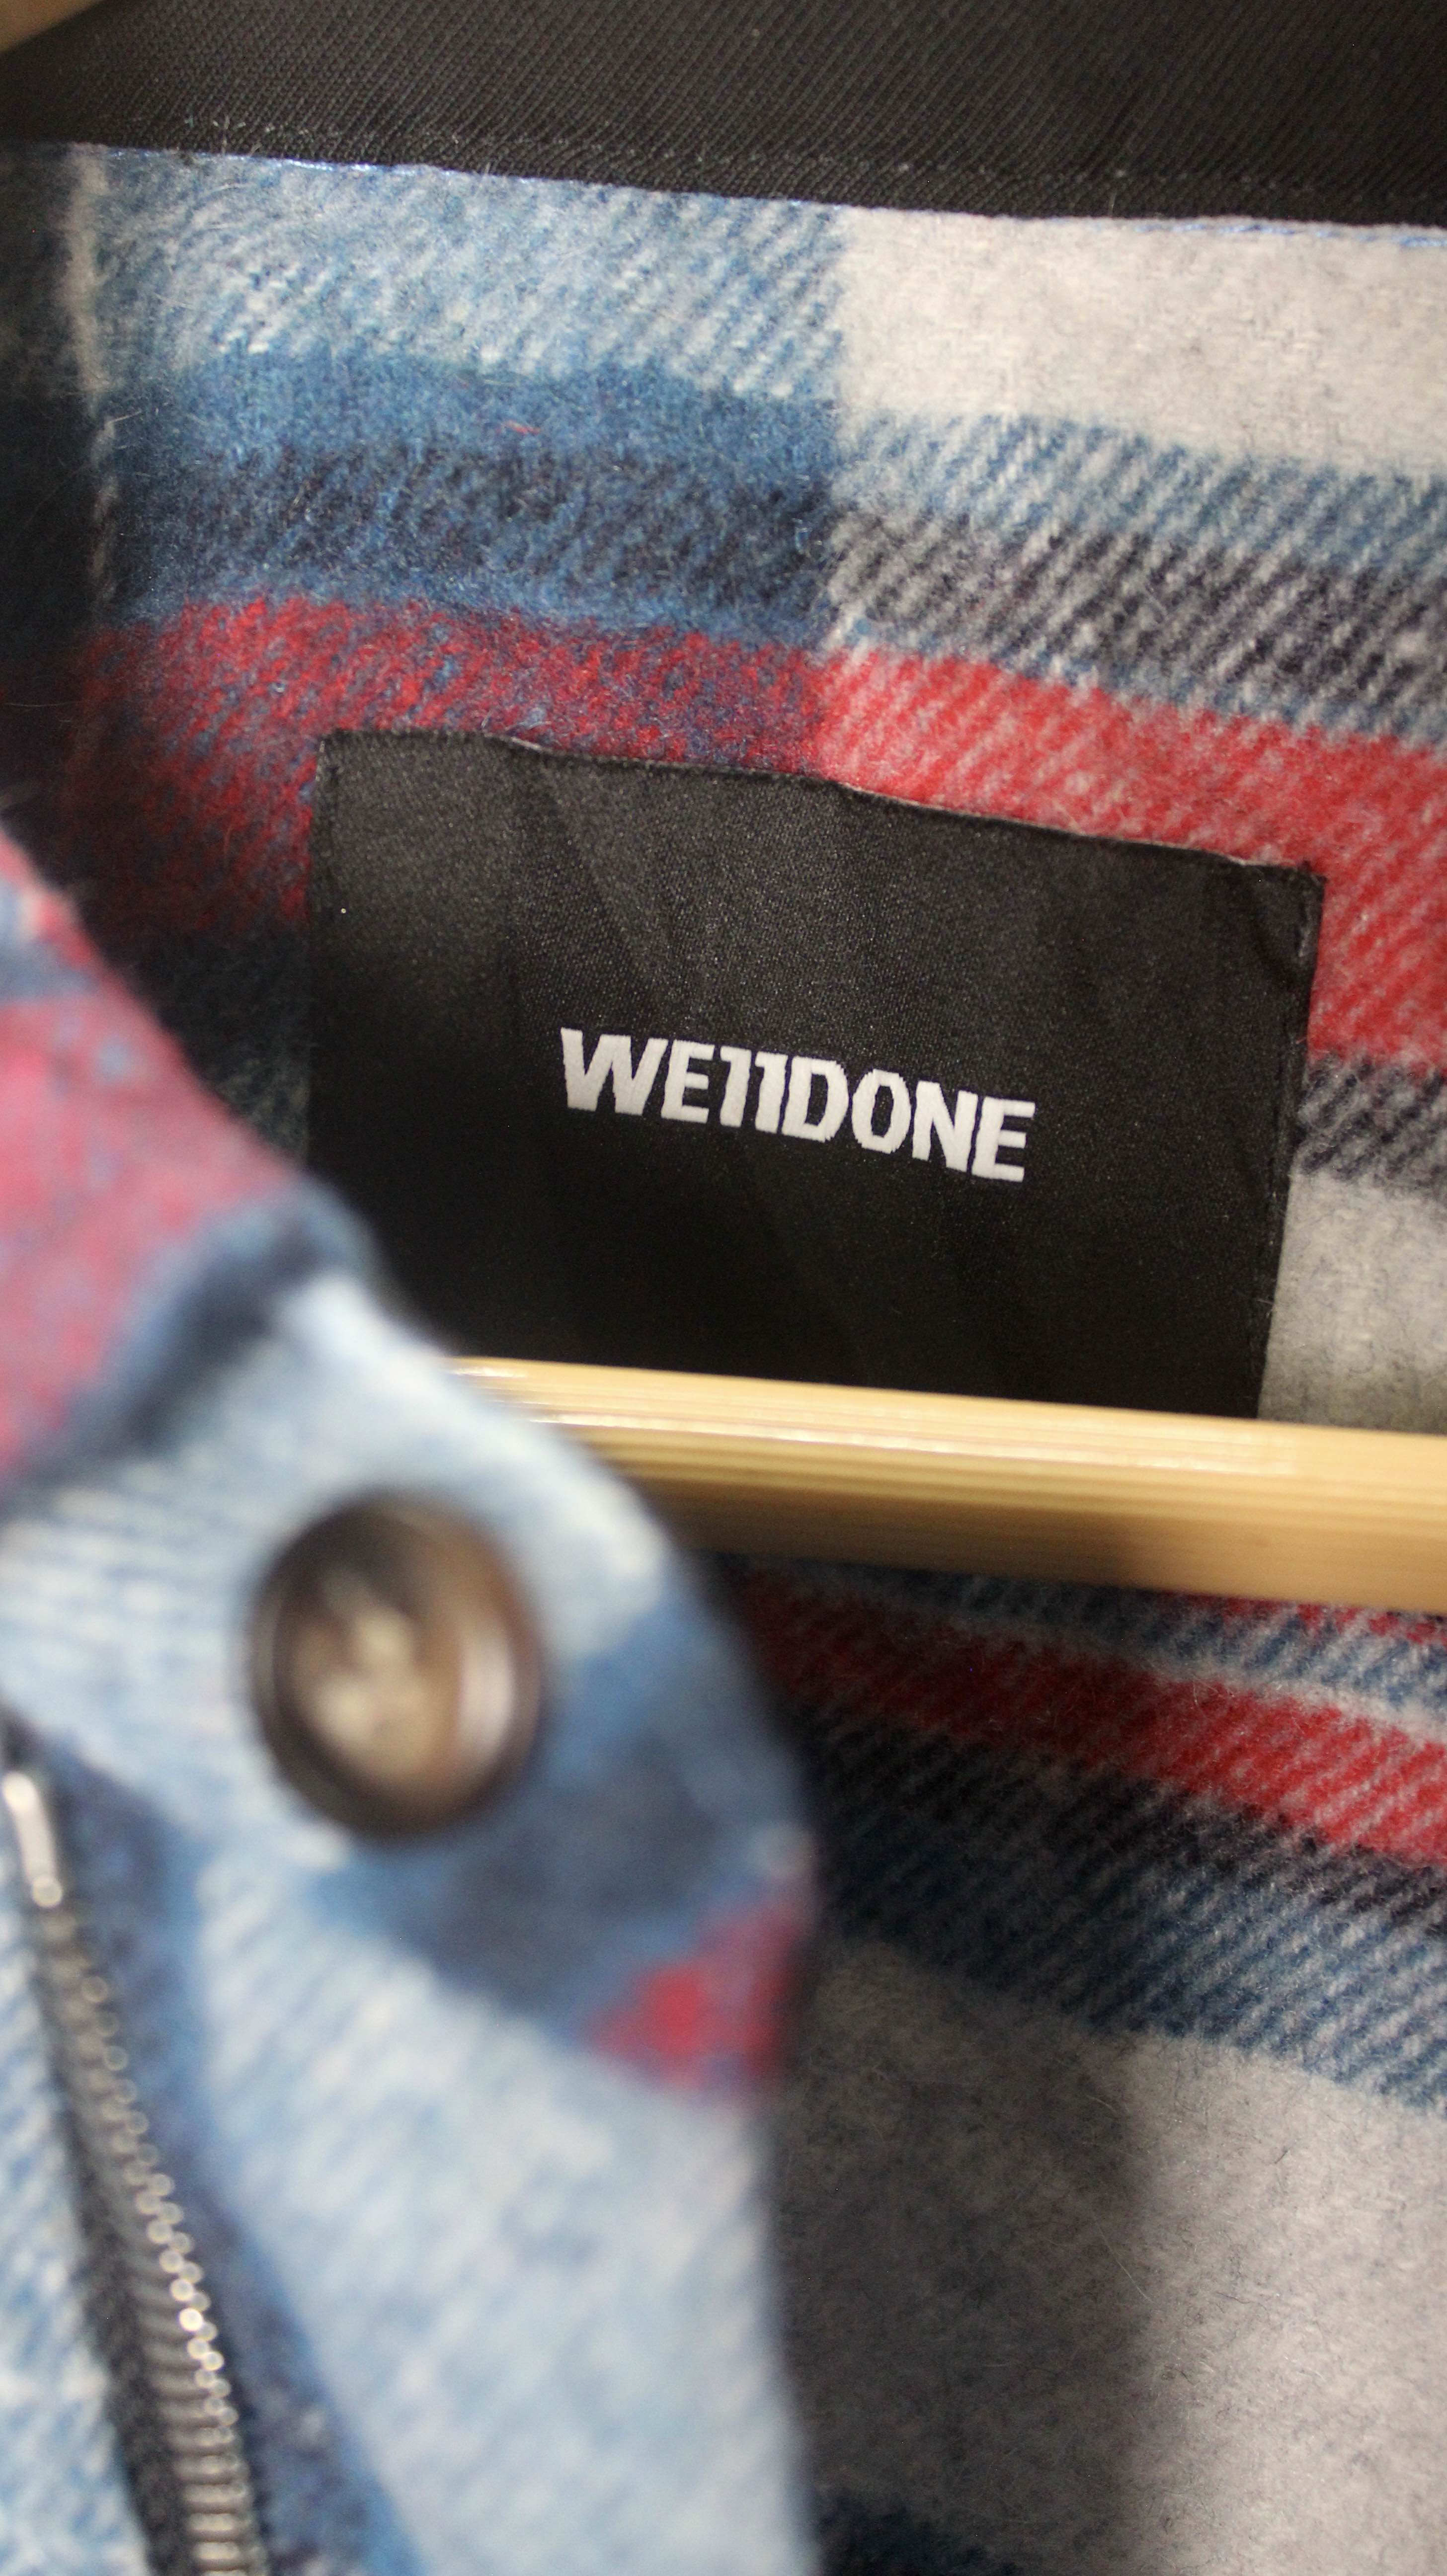 We11done - Checked Wool Shirt Multicolor Plaid Jacket Justin Bieber - 6